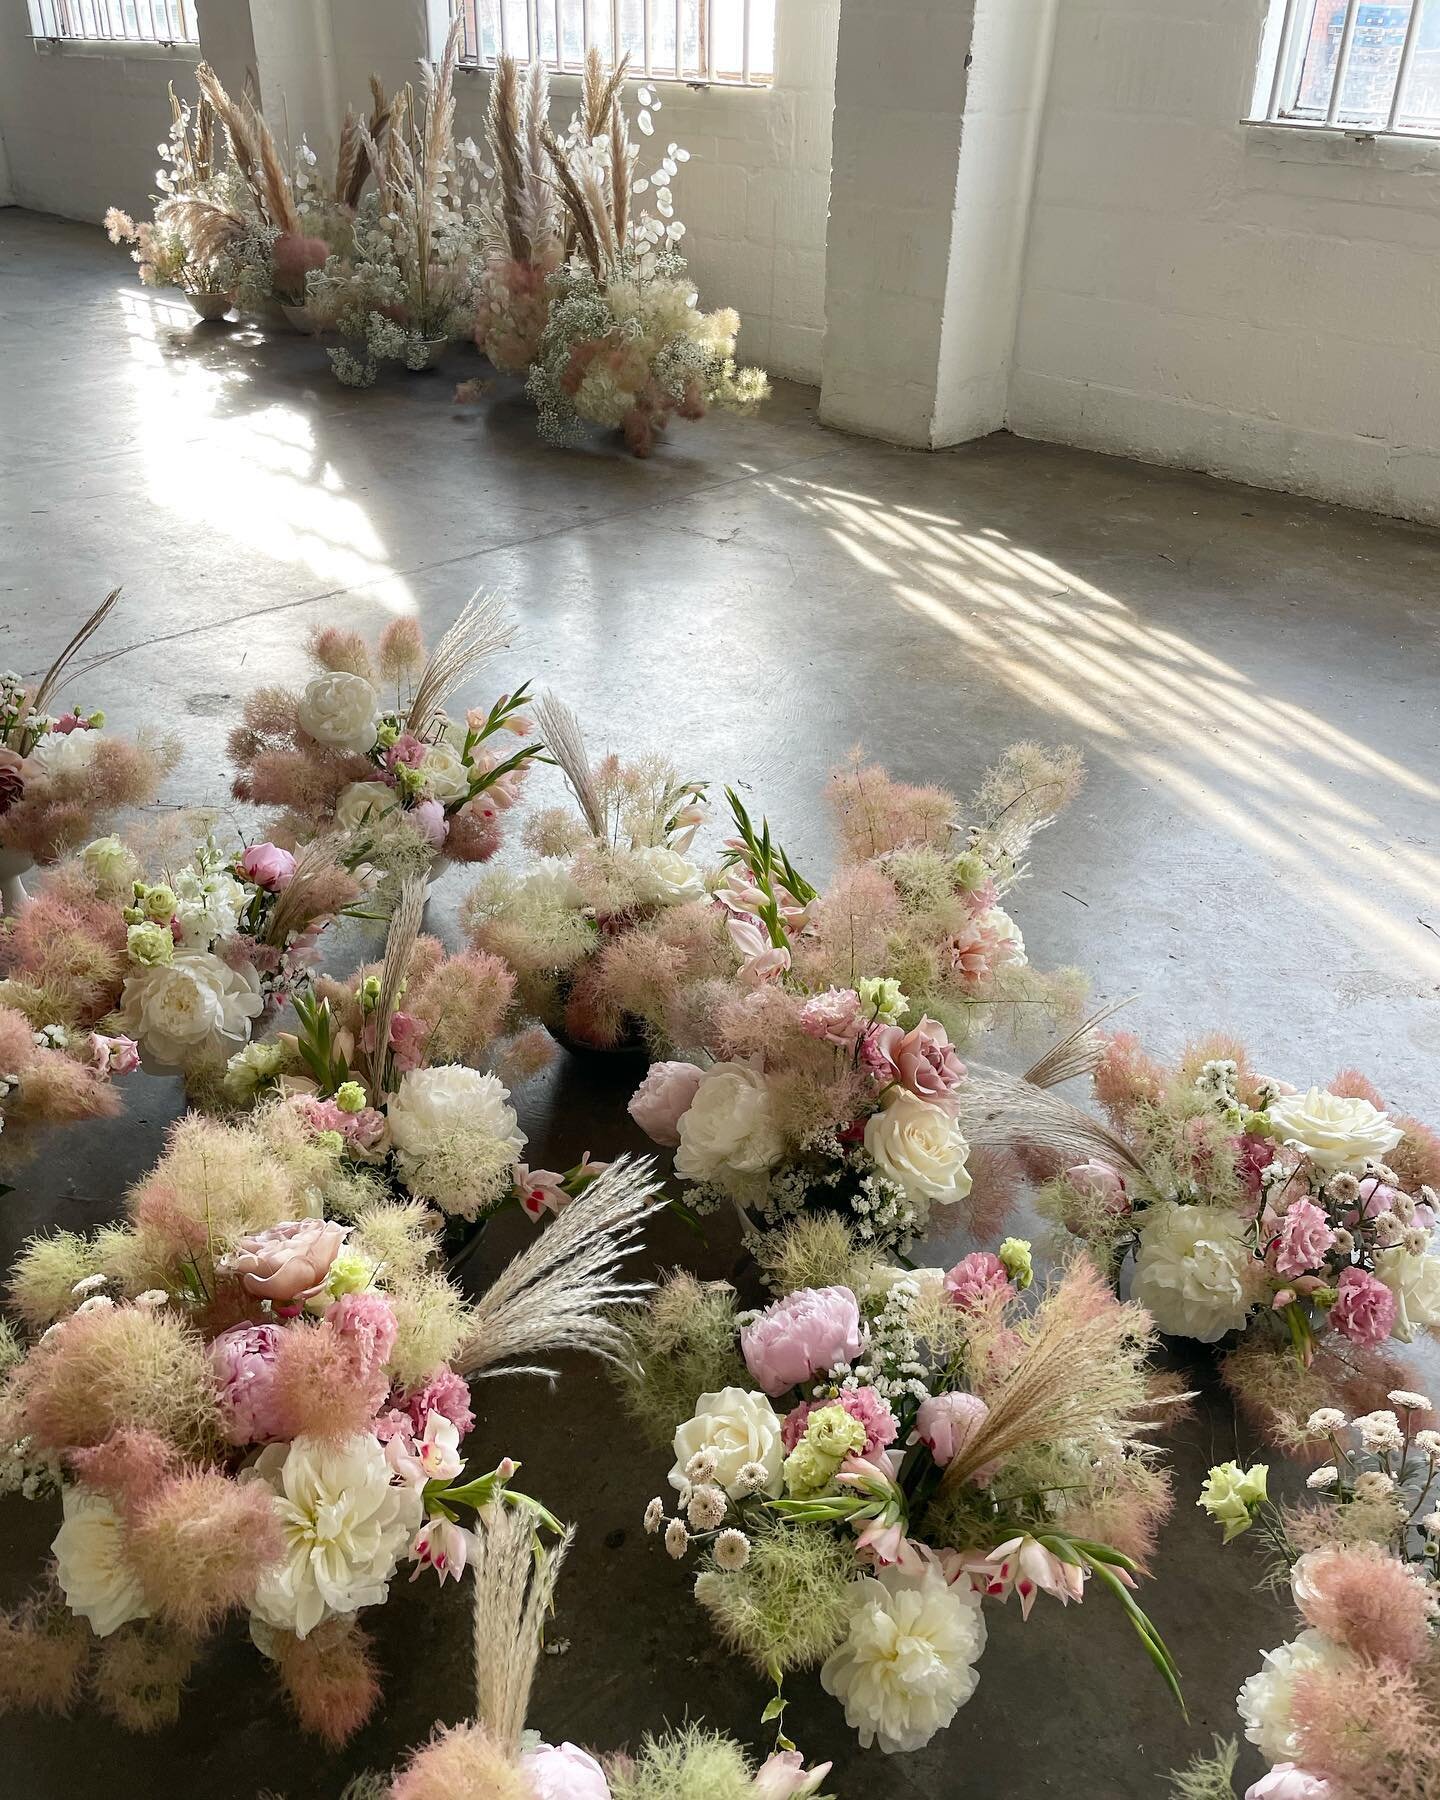 Low bowl arrangements for the tables for Lauren &amp; Chris and tall statement aisle mounds which lined the way to the installation where they wed 🤍 oh and more smokebush&hellip;.🤪